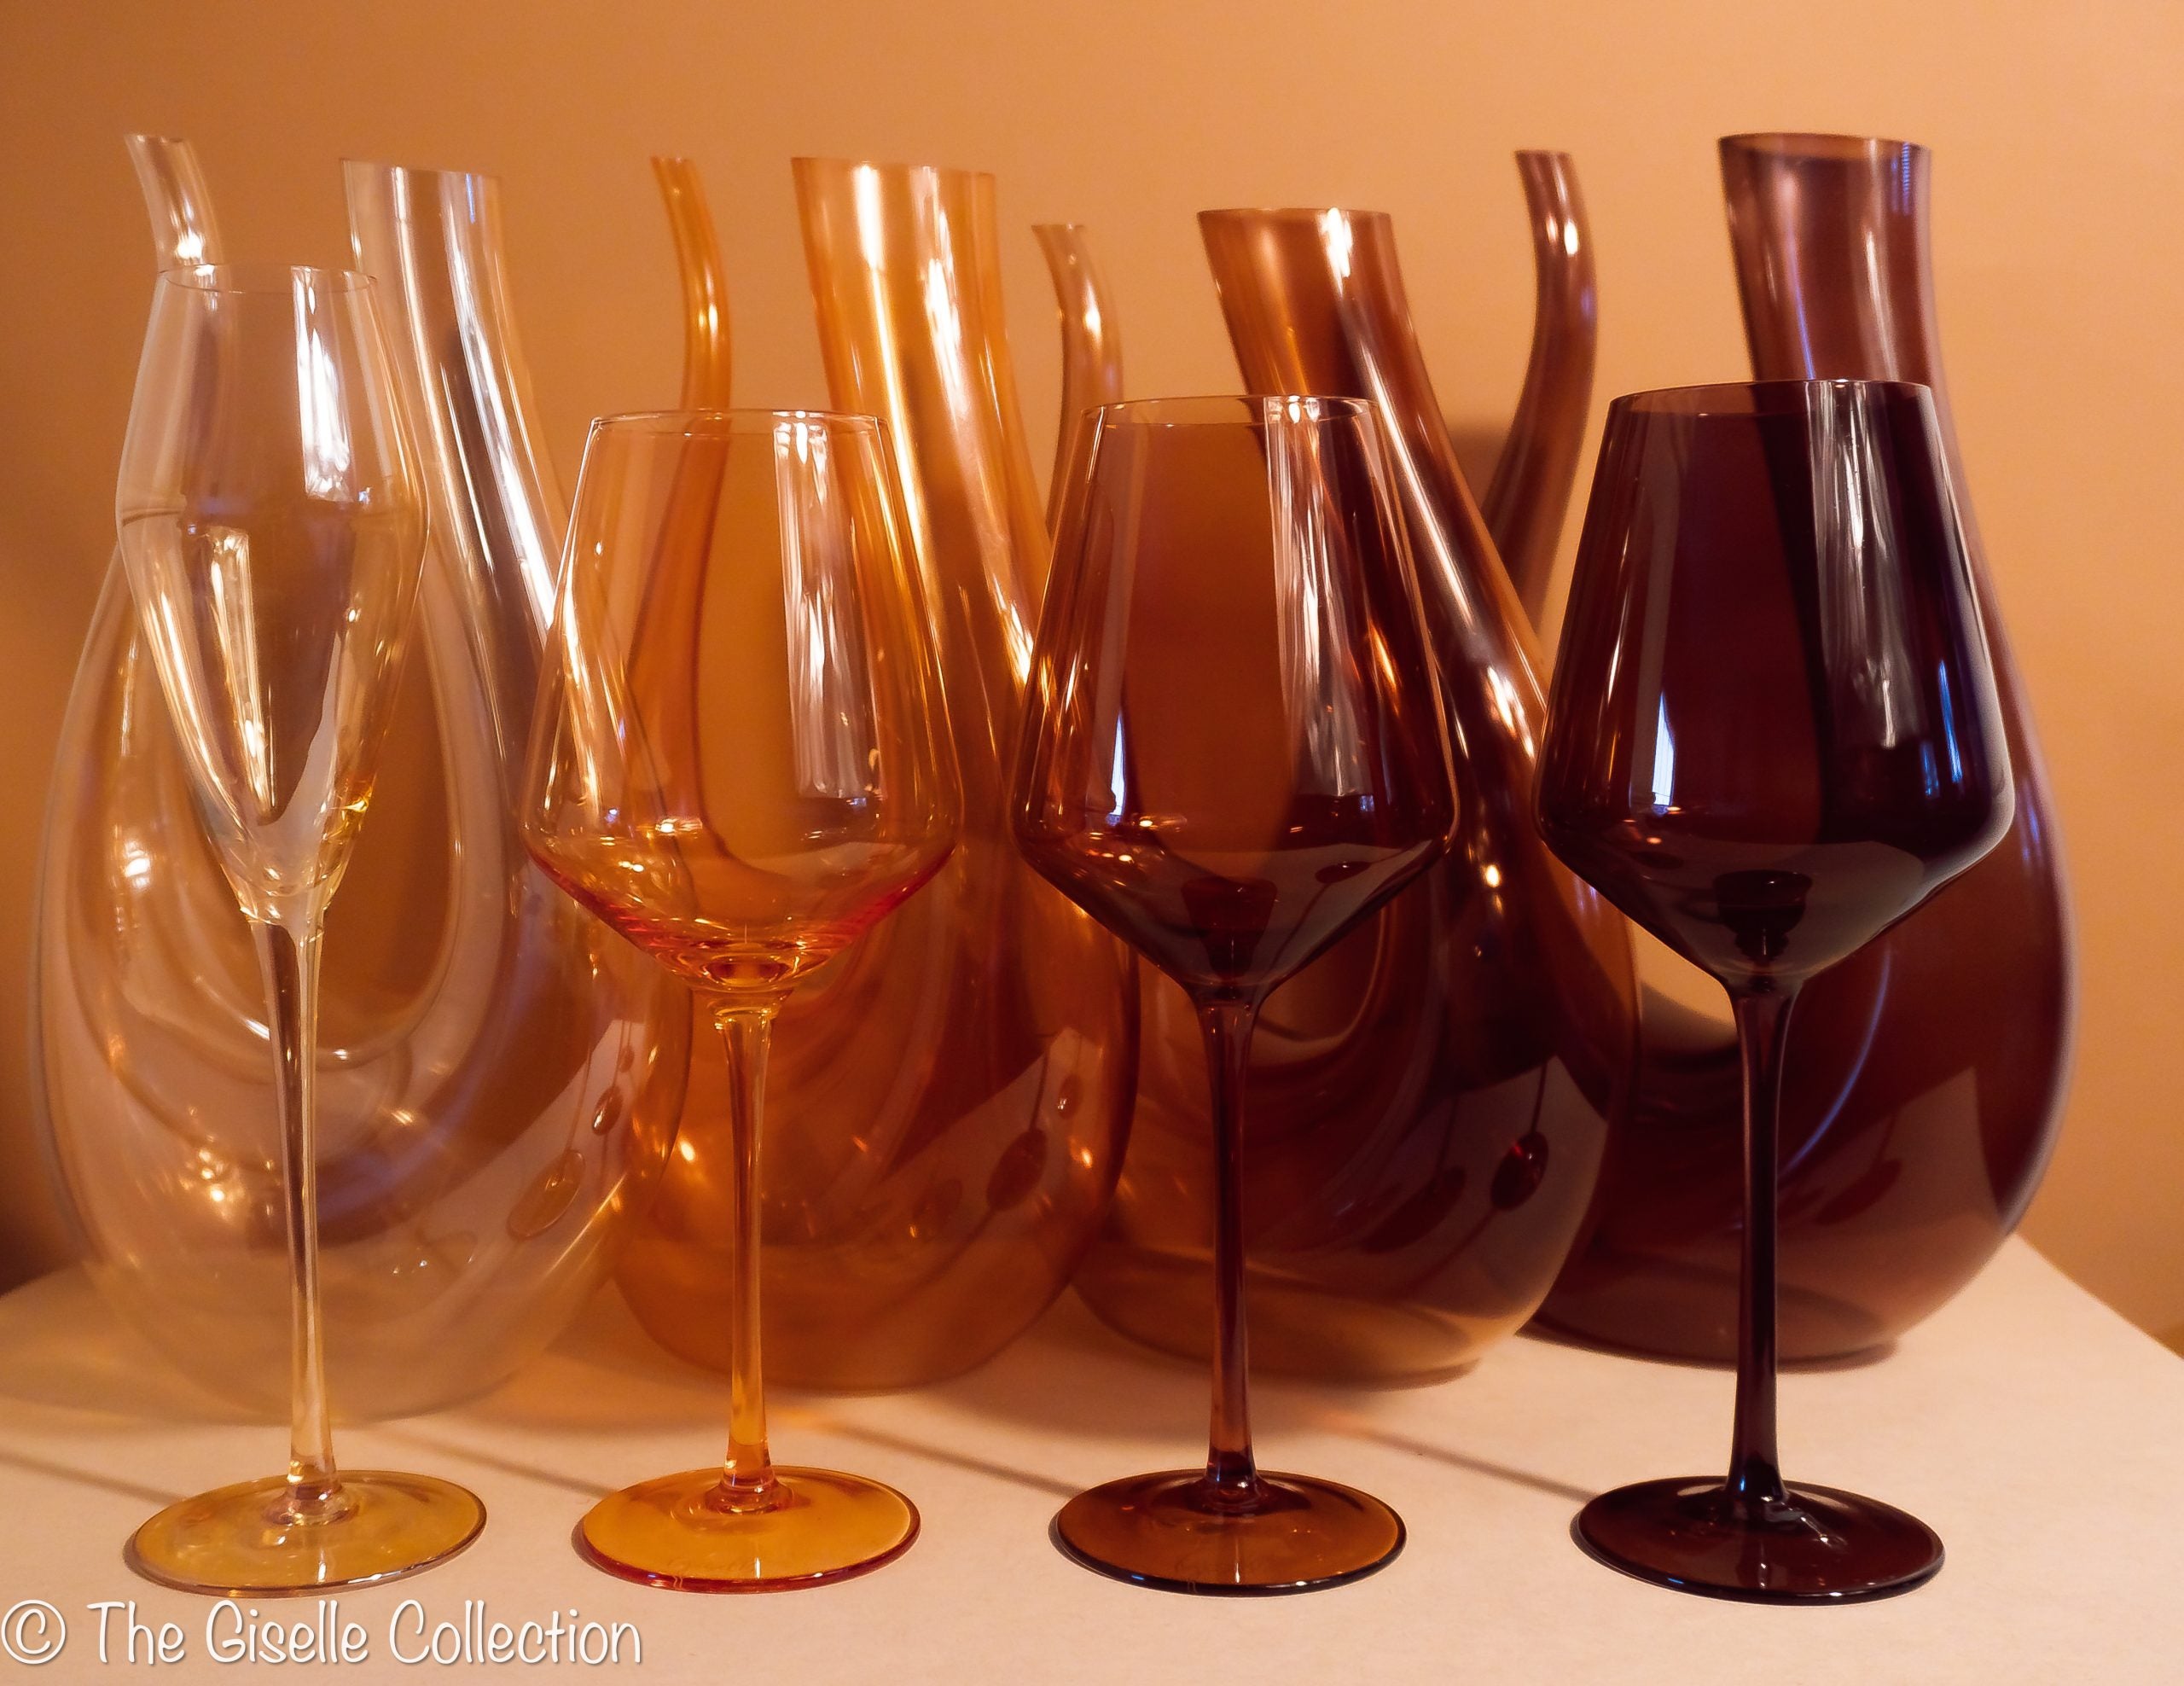 Let's Toast: This Is The Melanated Glassware You Didn't Know You Needed In Your Cabinet